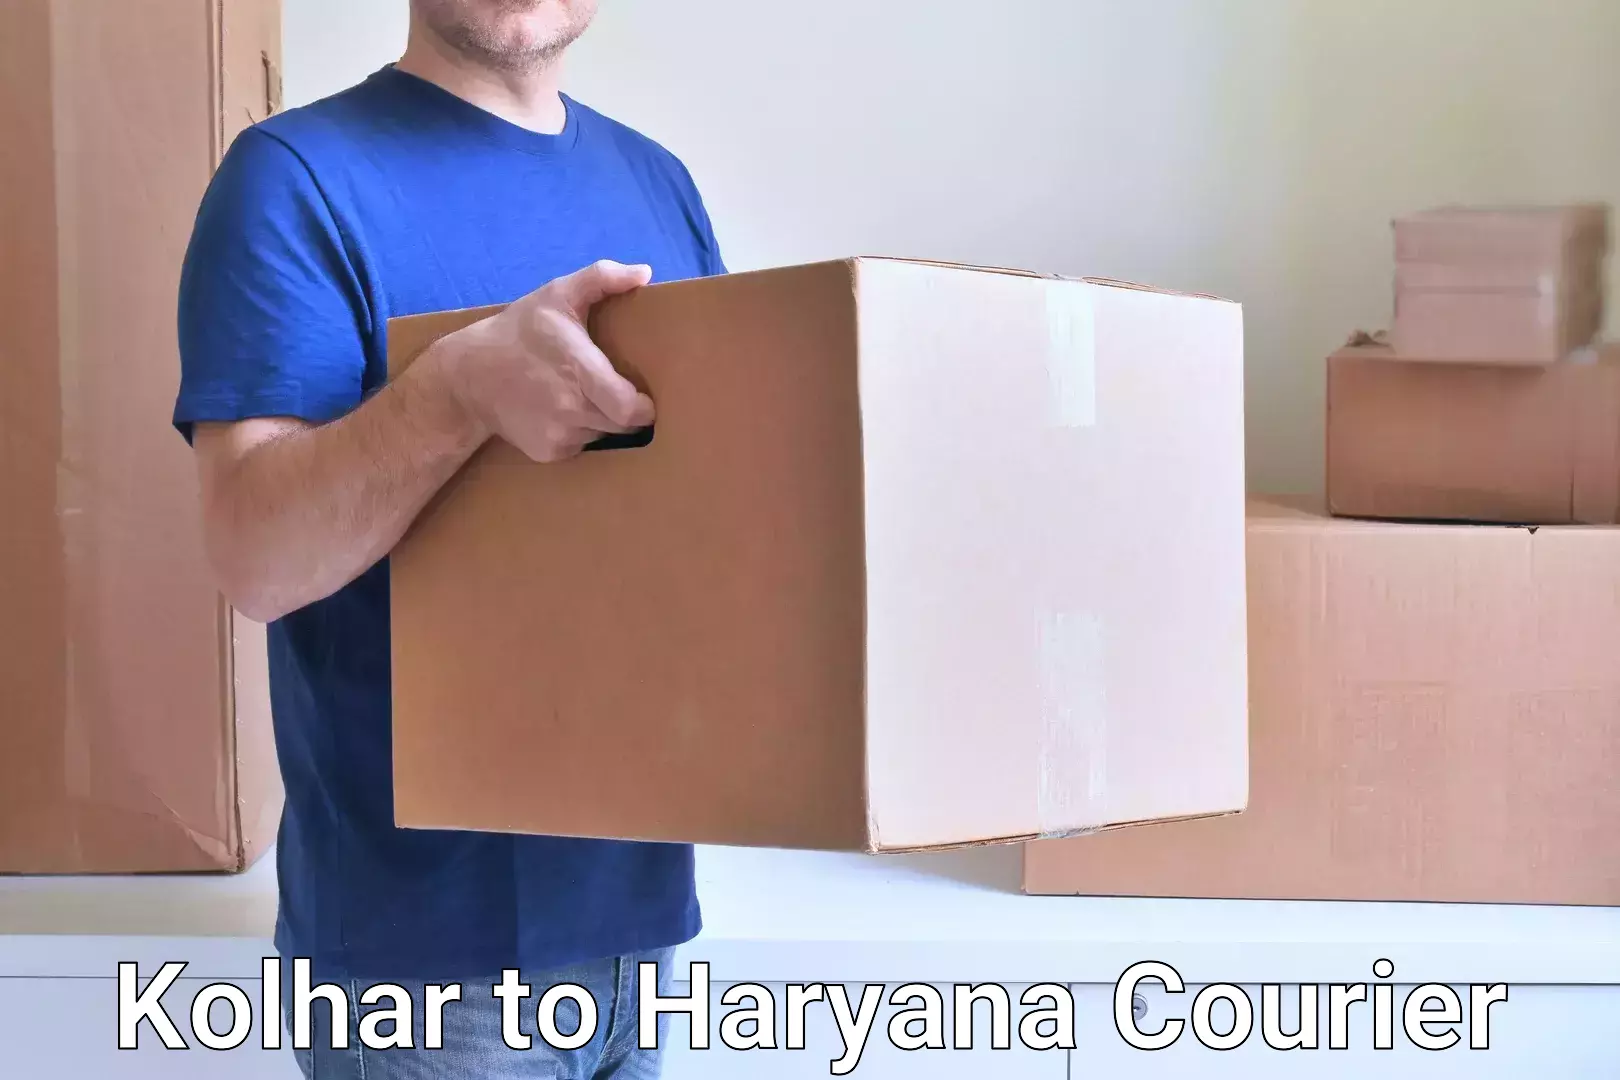 24/7 courier service in Kolhar to Sonipat